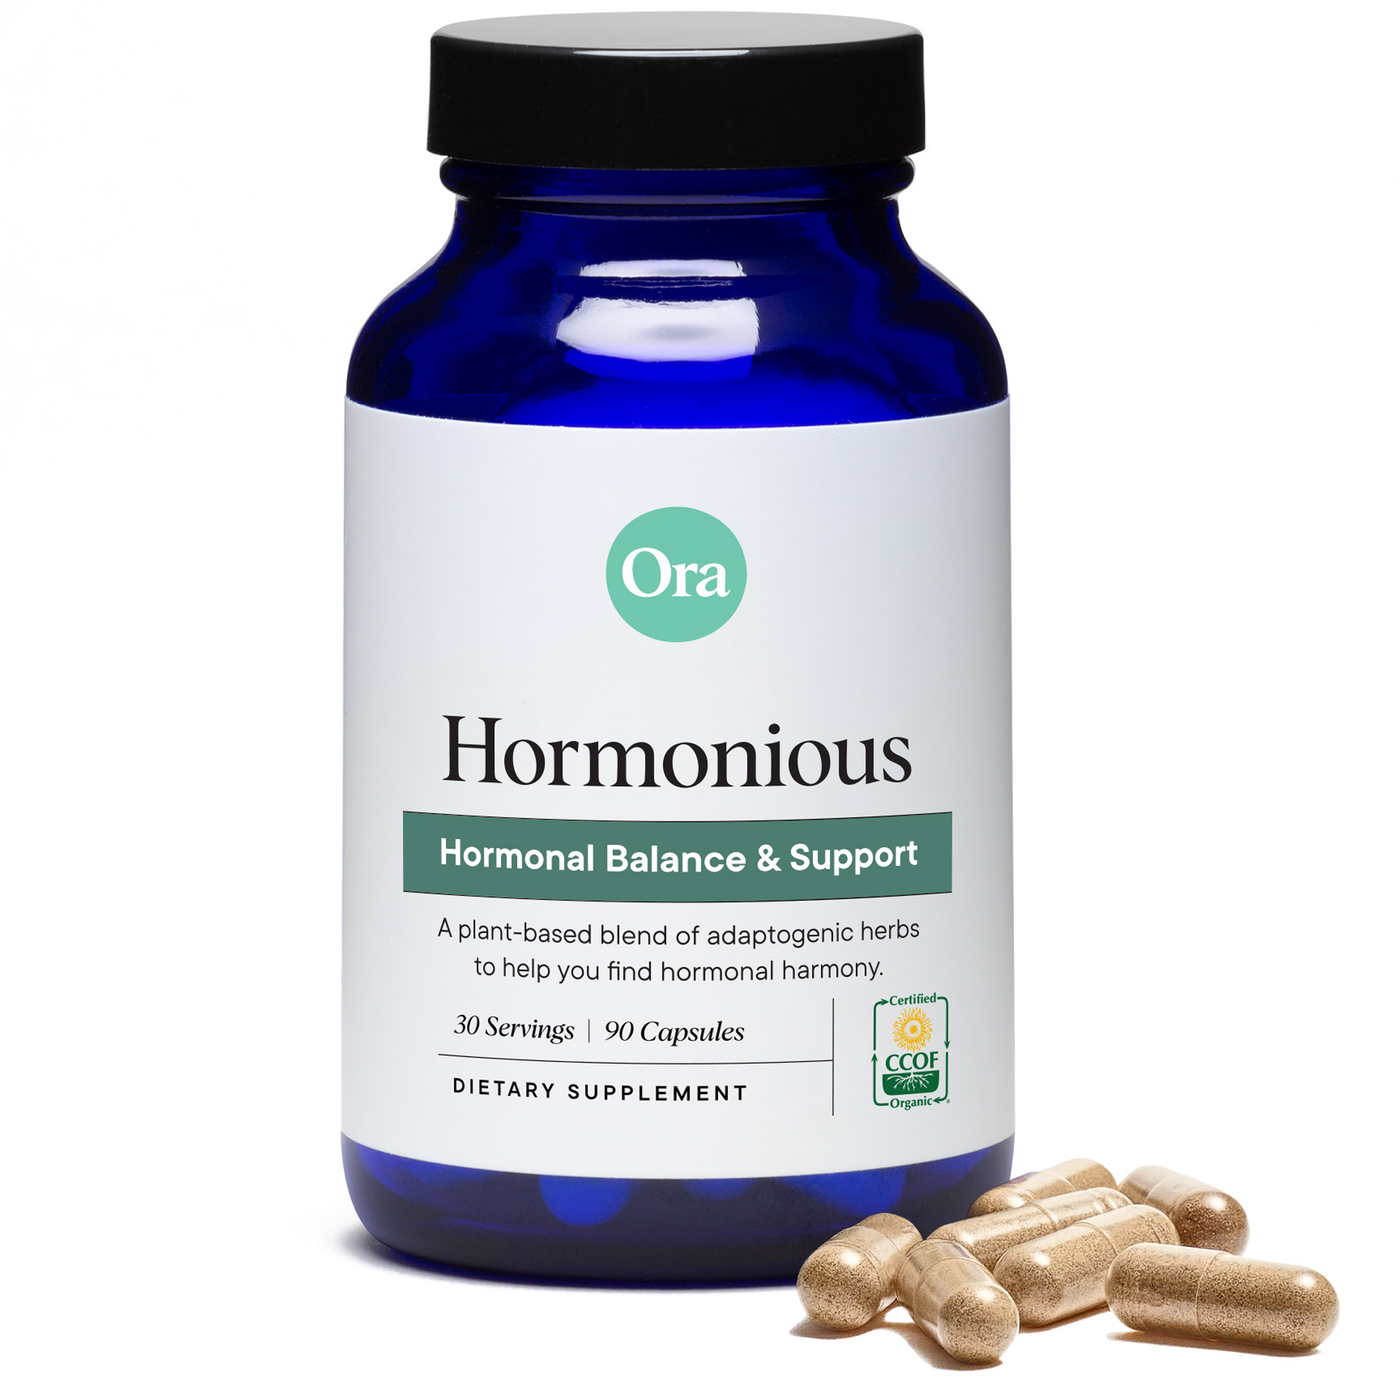 Hormonious ules Curated Wellness